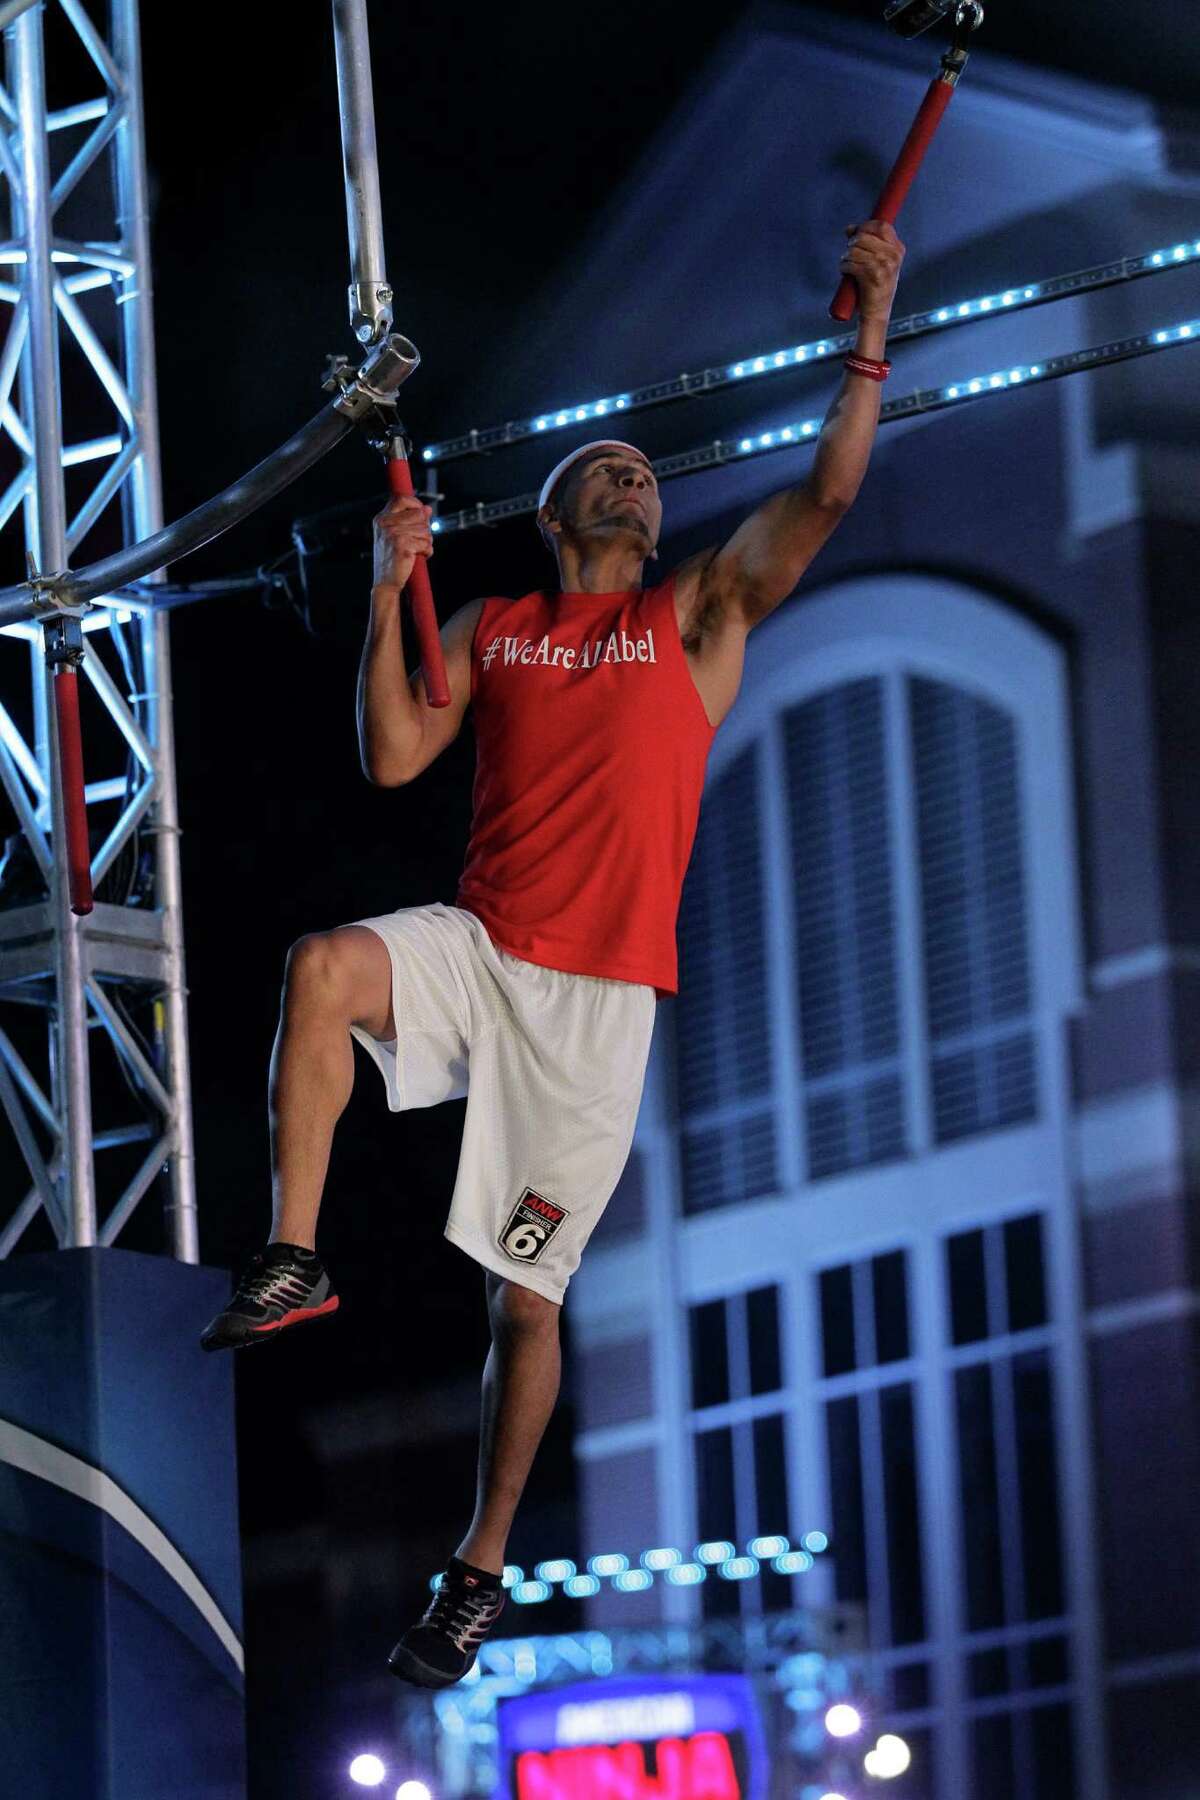 Edinburg resident Abel Gonzalez competes in the Houston qualifiers of "American Ninja Warrior," which aired on NBC on June 8, 2015.